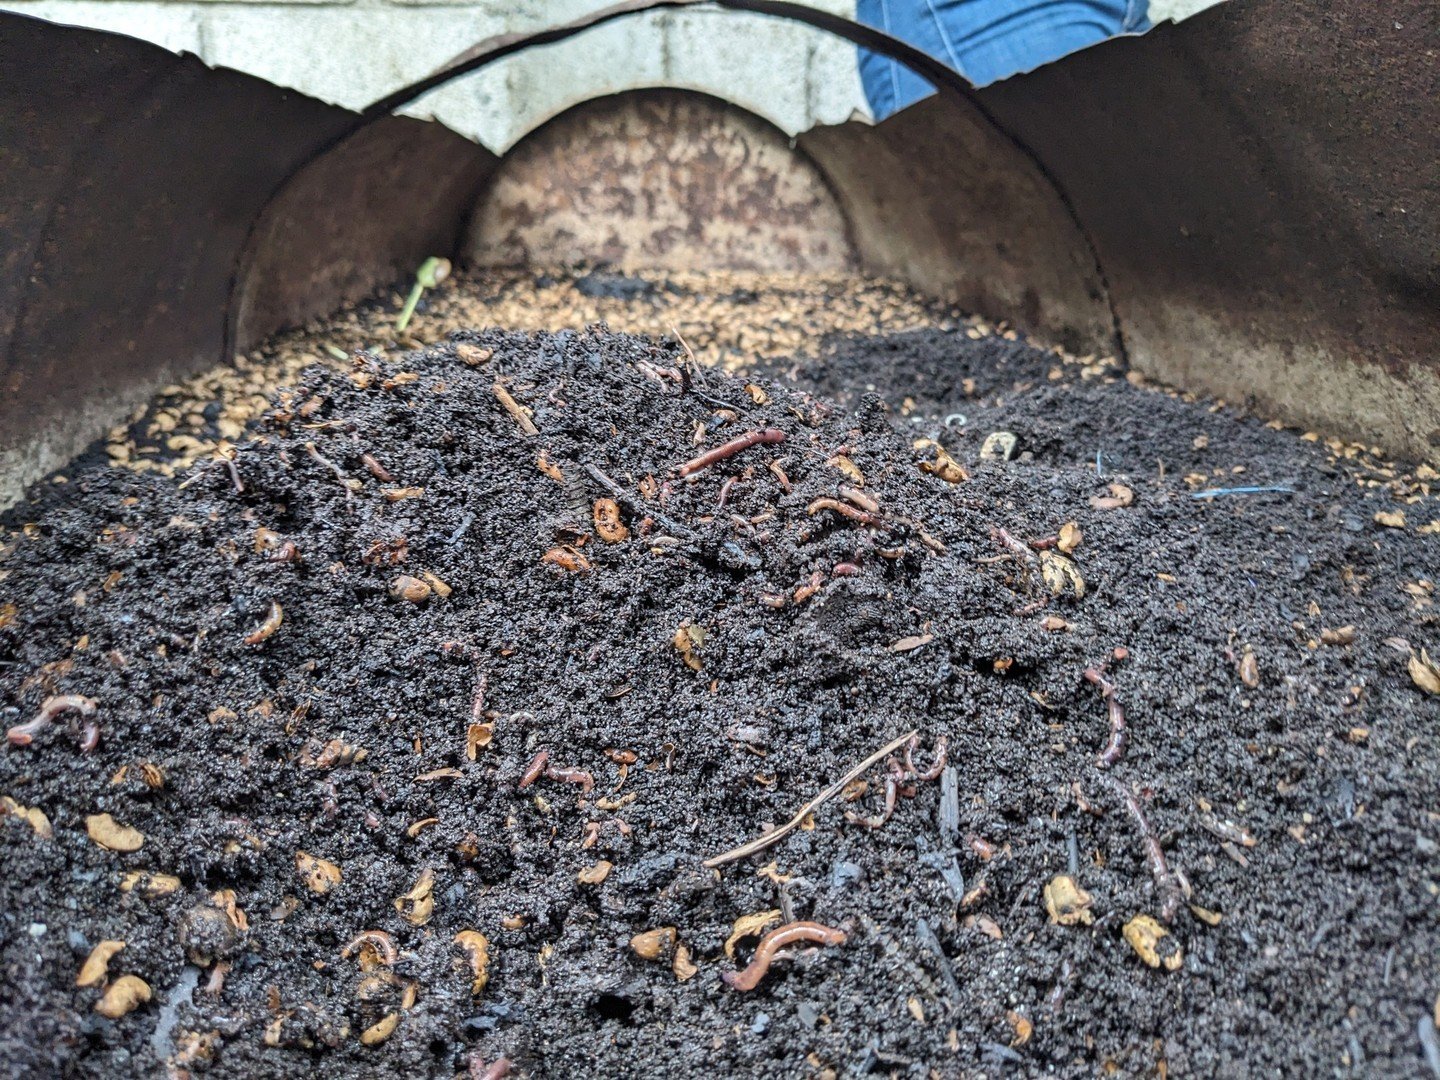 Turning coffee pulp into nutrient-rich compost with a little help from our worm friends! ⁠
⁠
At our Guatemala dry mill, we showcase how composting coffee cherries with worms speeds up the process, yielding extra-rich compost ideal for nurturing coffe